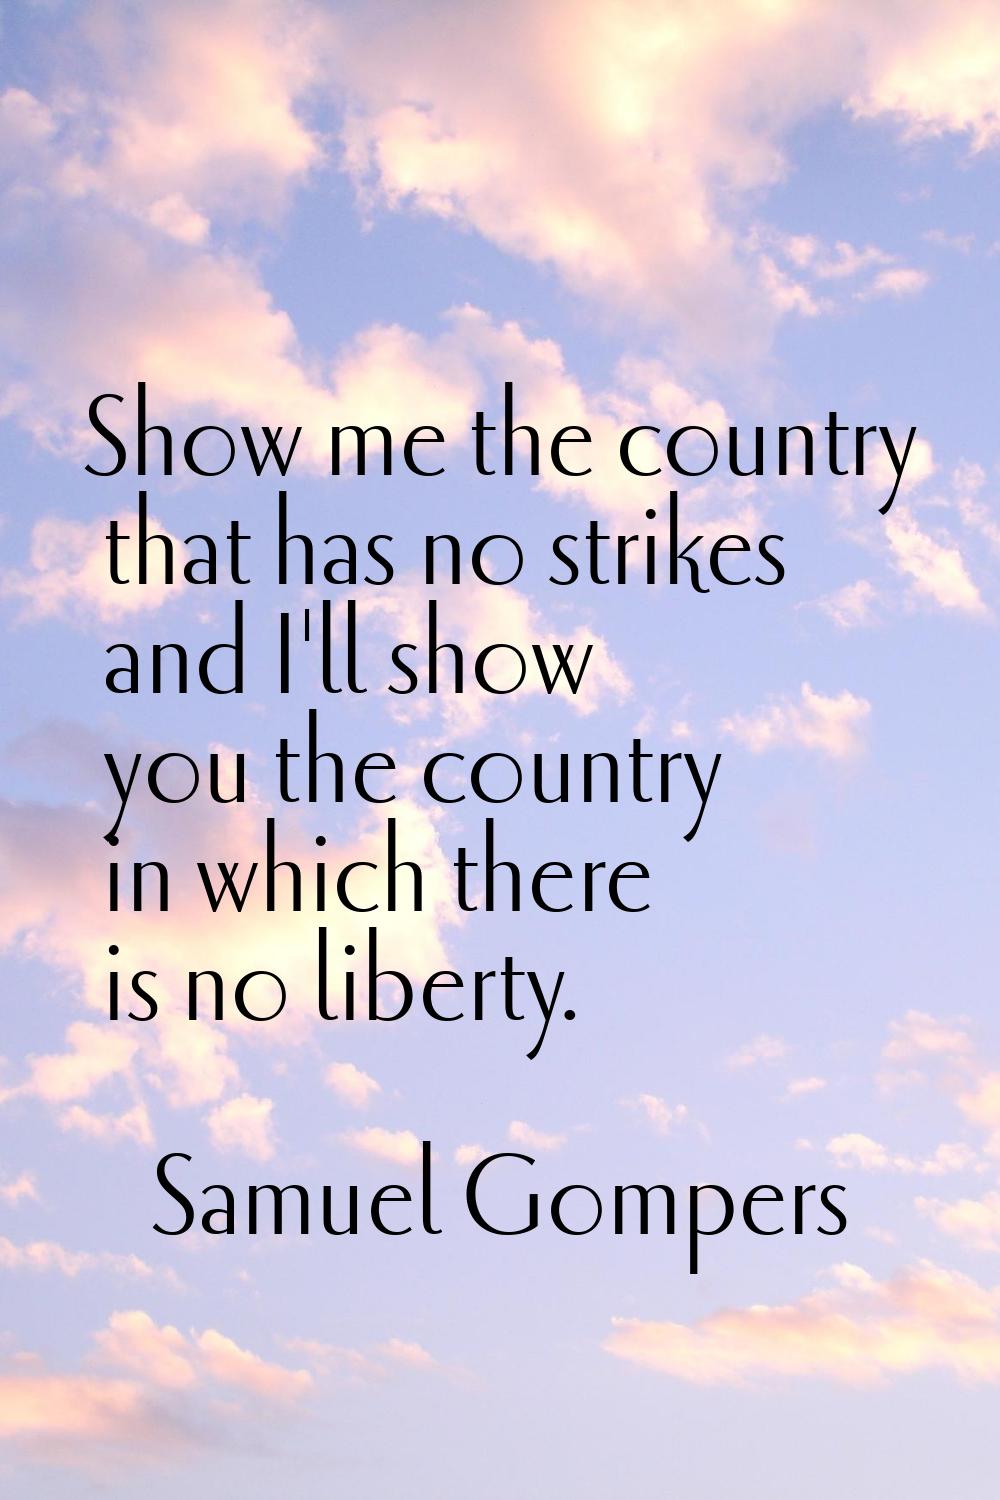 Show me the country that has no strikes and I'll show you the country in which there is no liberty.